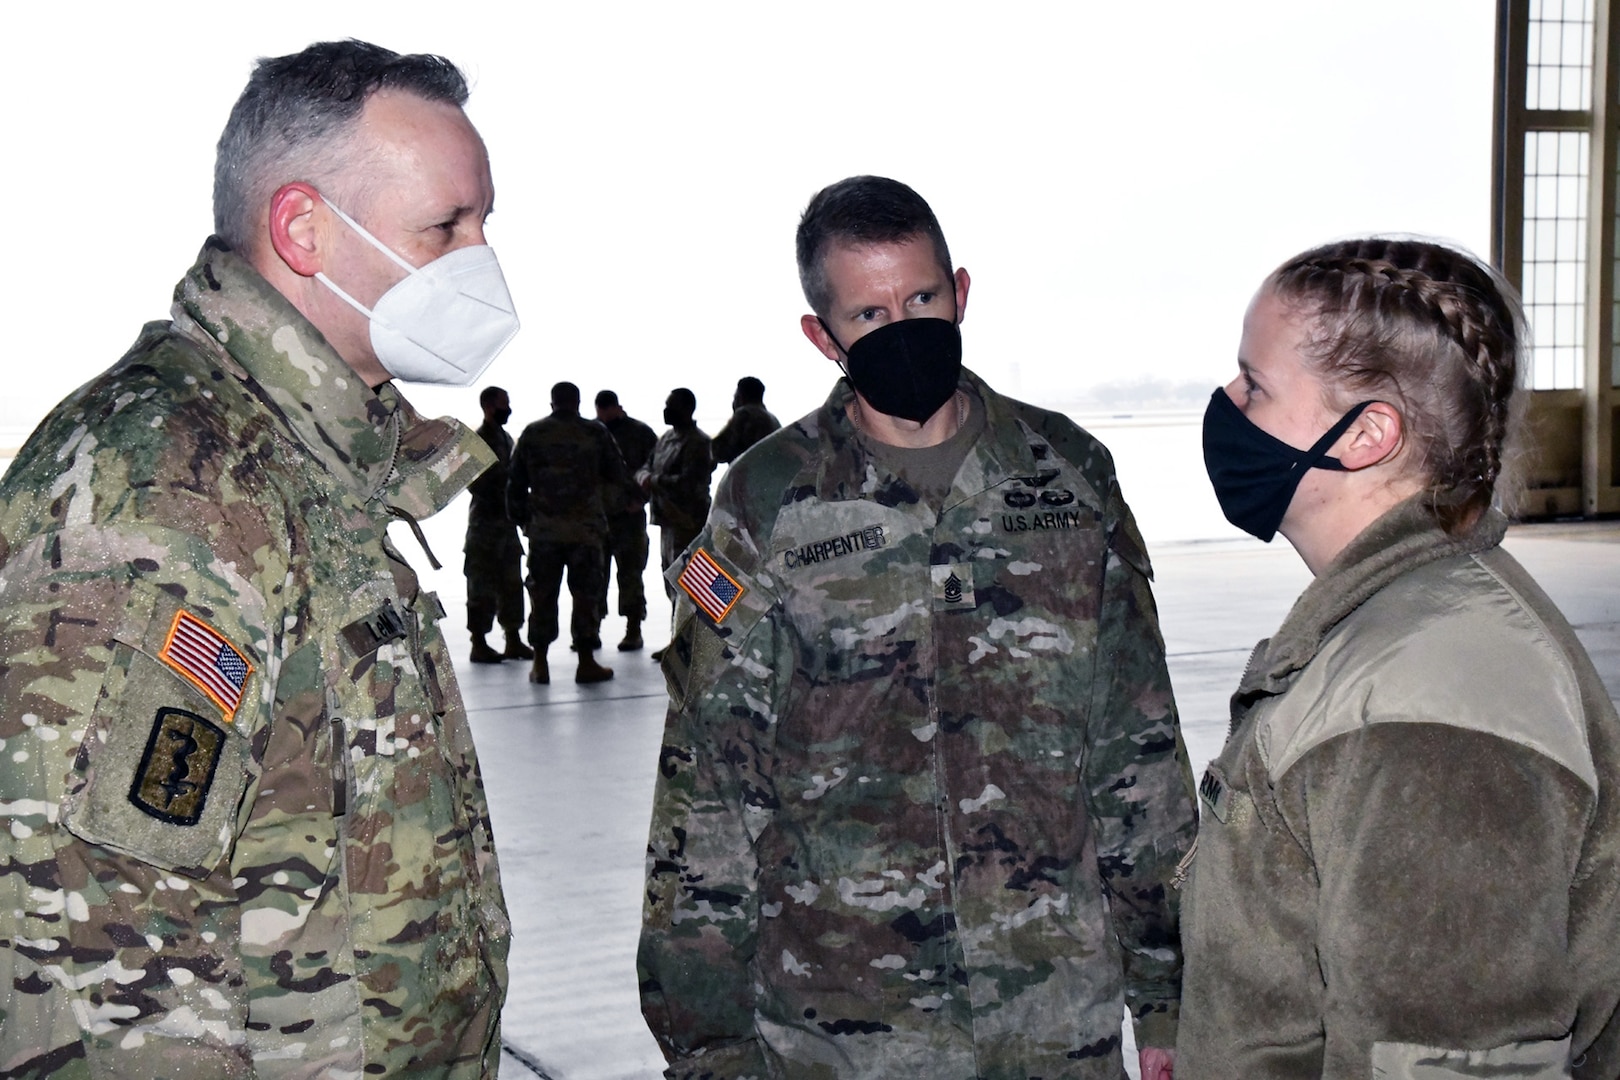 Spc. Angela Thresher (center), a 68W Combat Medic who was identified as the 10,000th Soldier to depart from the U.S. Army Medical Center of Excellence in a controlled manner as part of the COVID-19 pandemic, speaks with Maj. Gen. Dennis LeMaster, MEDCoE commanding general and MEDCoE Command Sgt. Maj. Clark Charpentier.